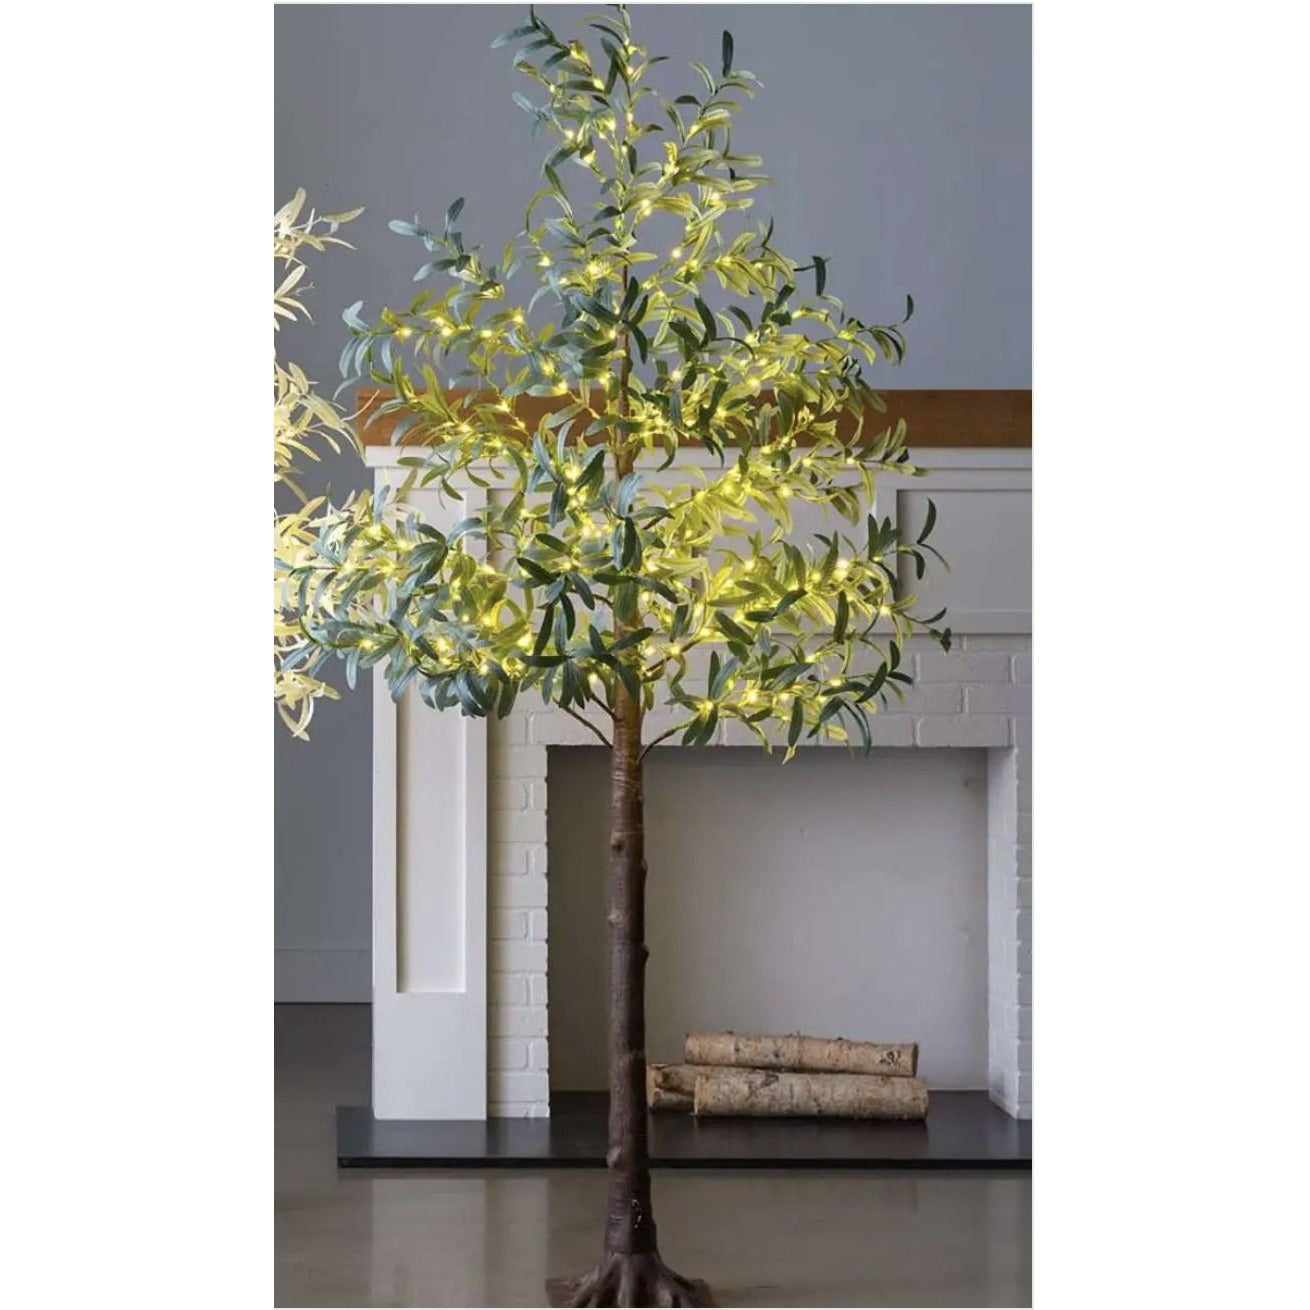 VivaTerra Indoor/ Outdoor Faux Lighted Olive Tree, 7' (Natural)